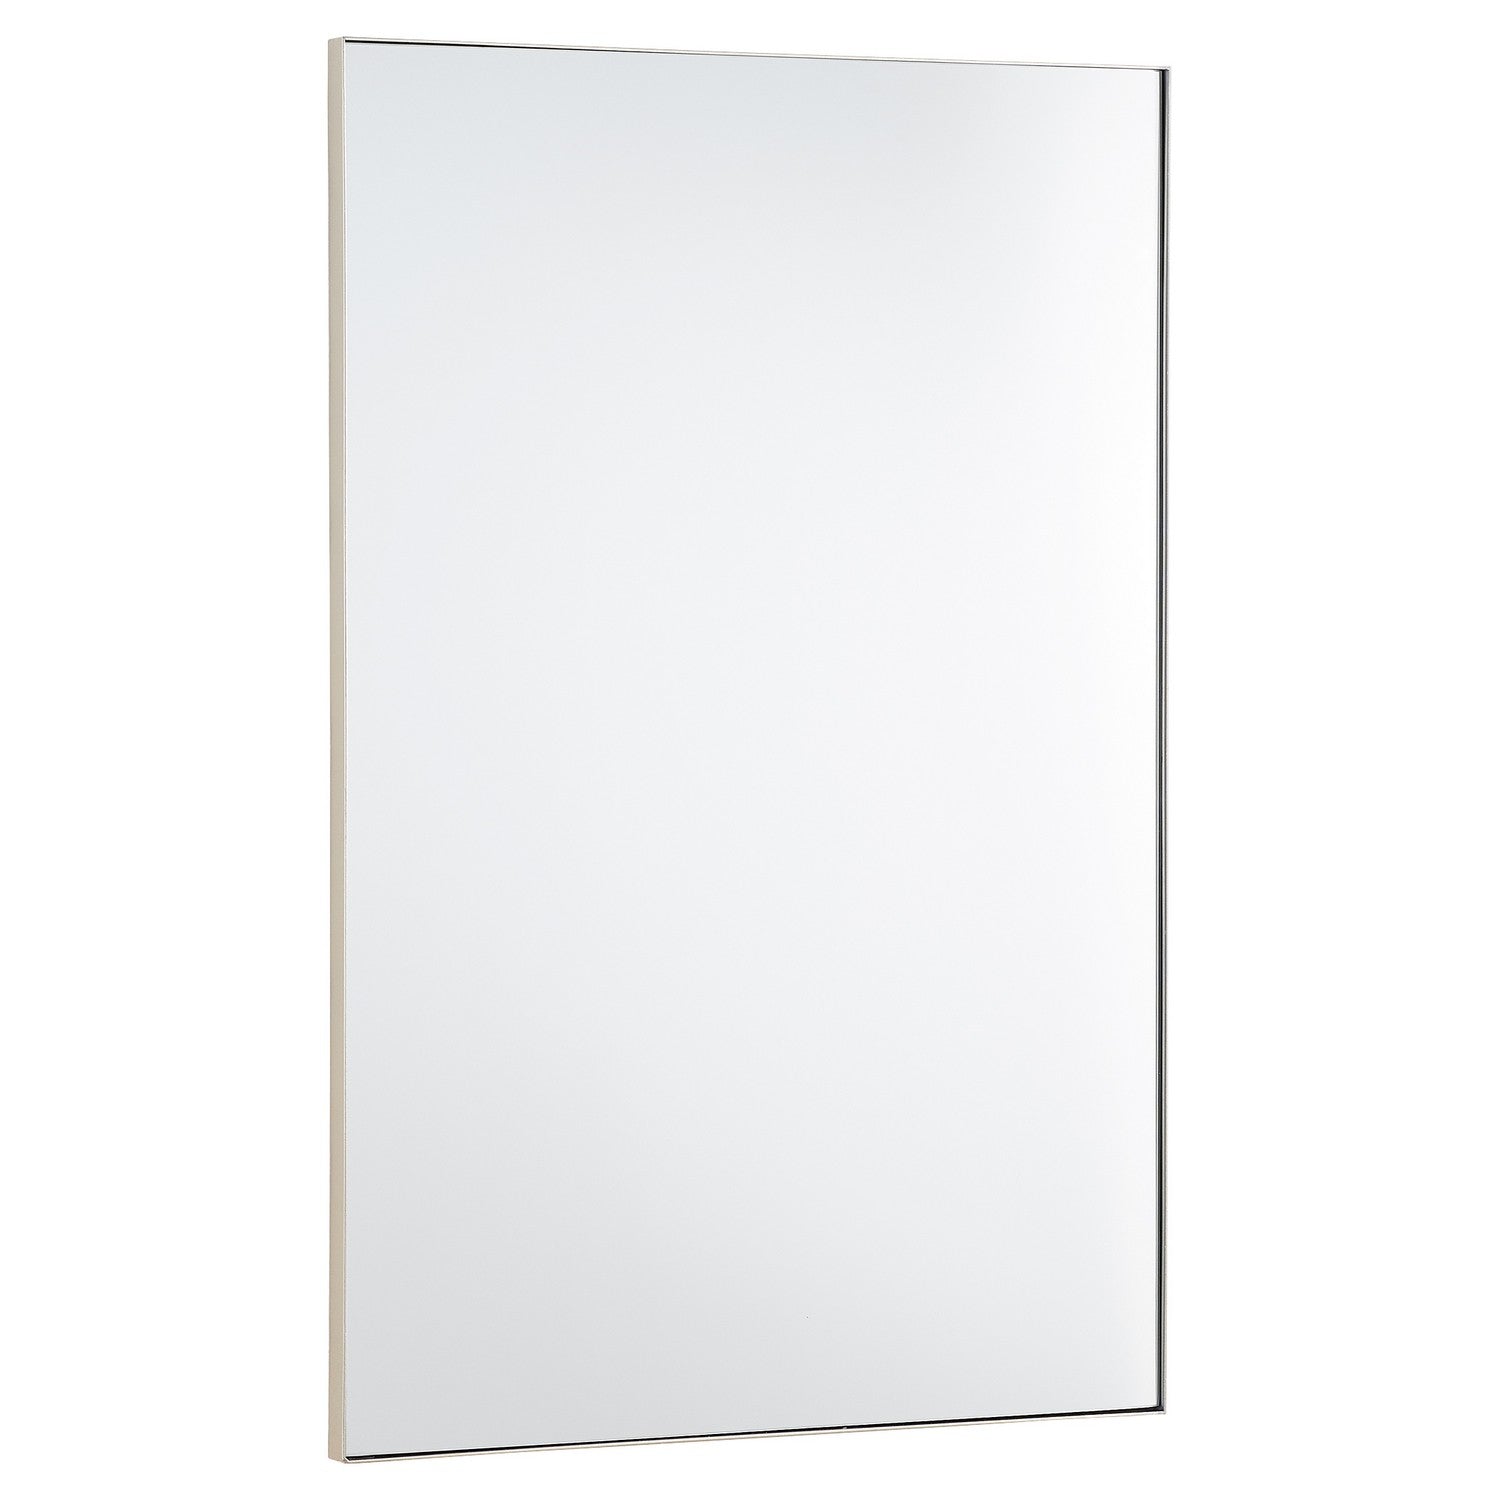 Quorum 11-2436-61 Mirror - Silver Finished